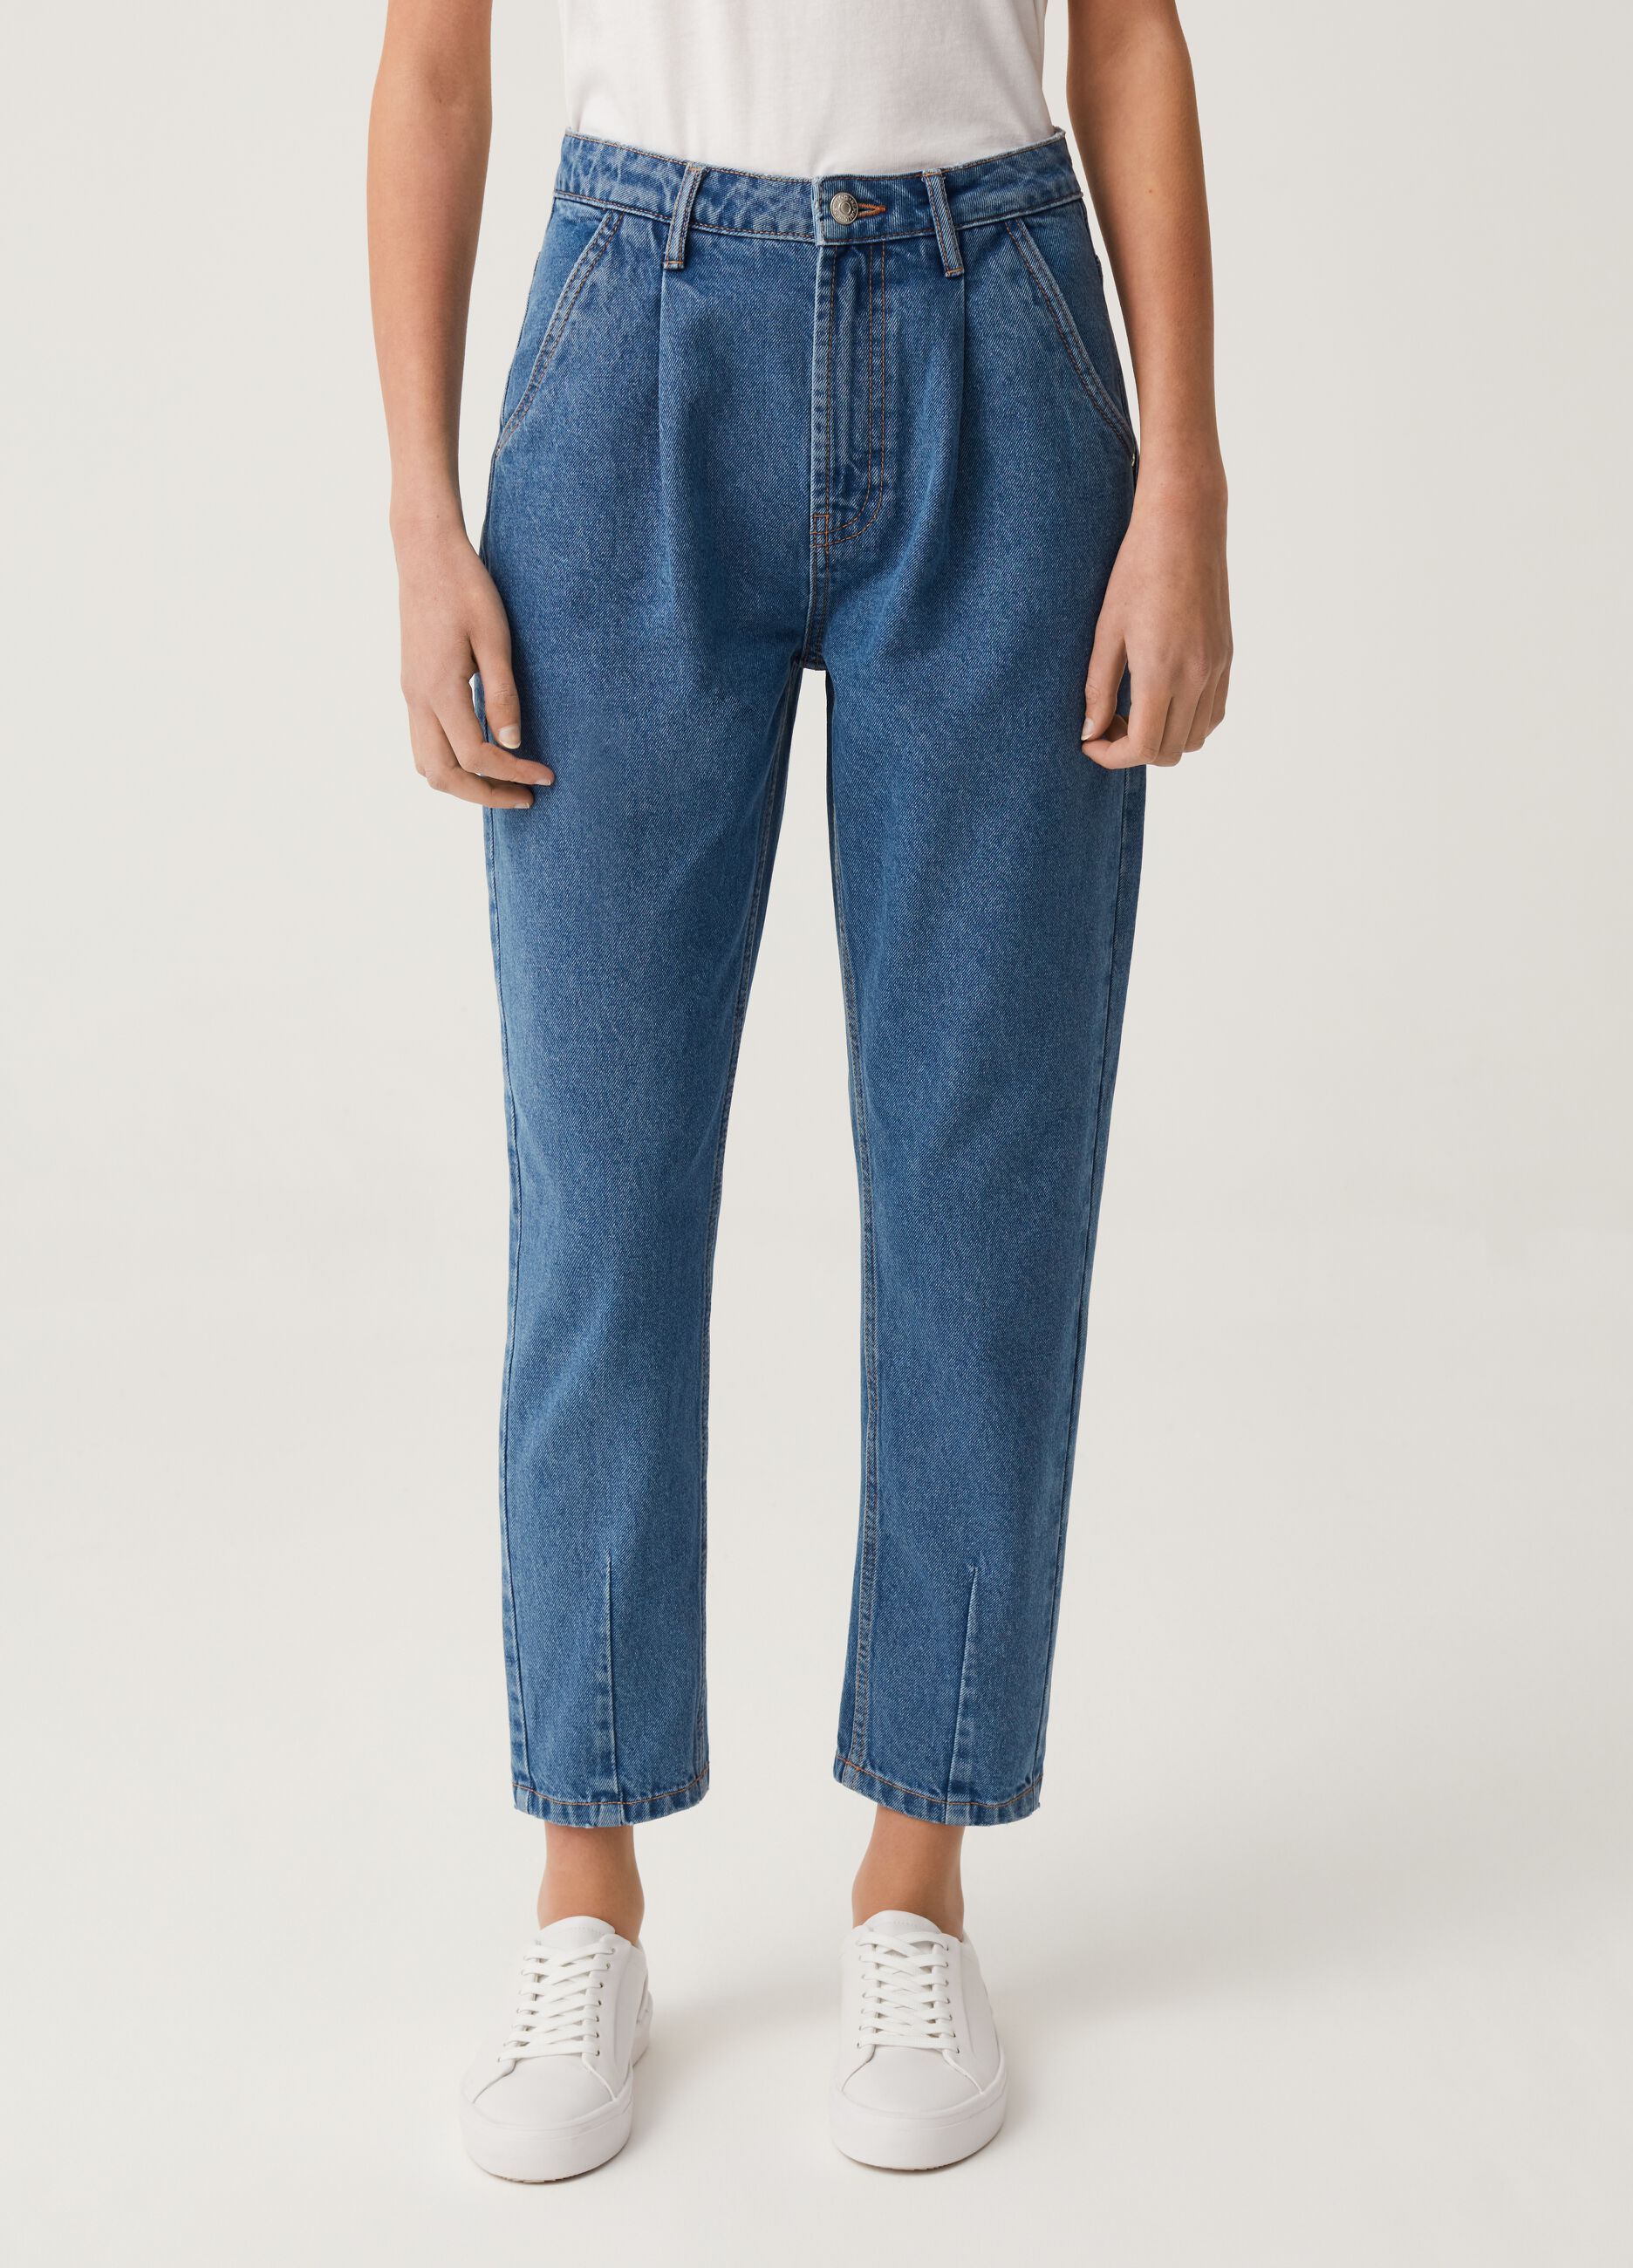 Slouchy jeans with darts